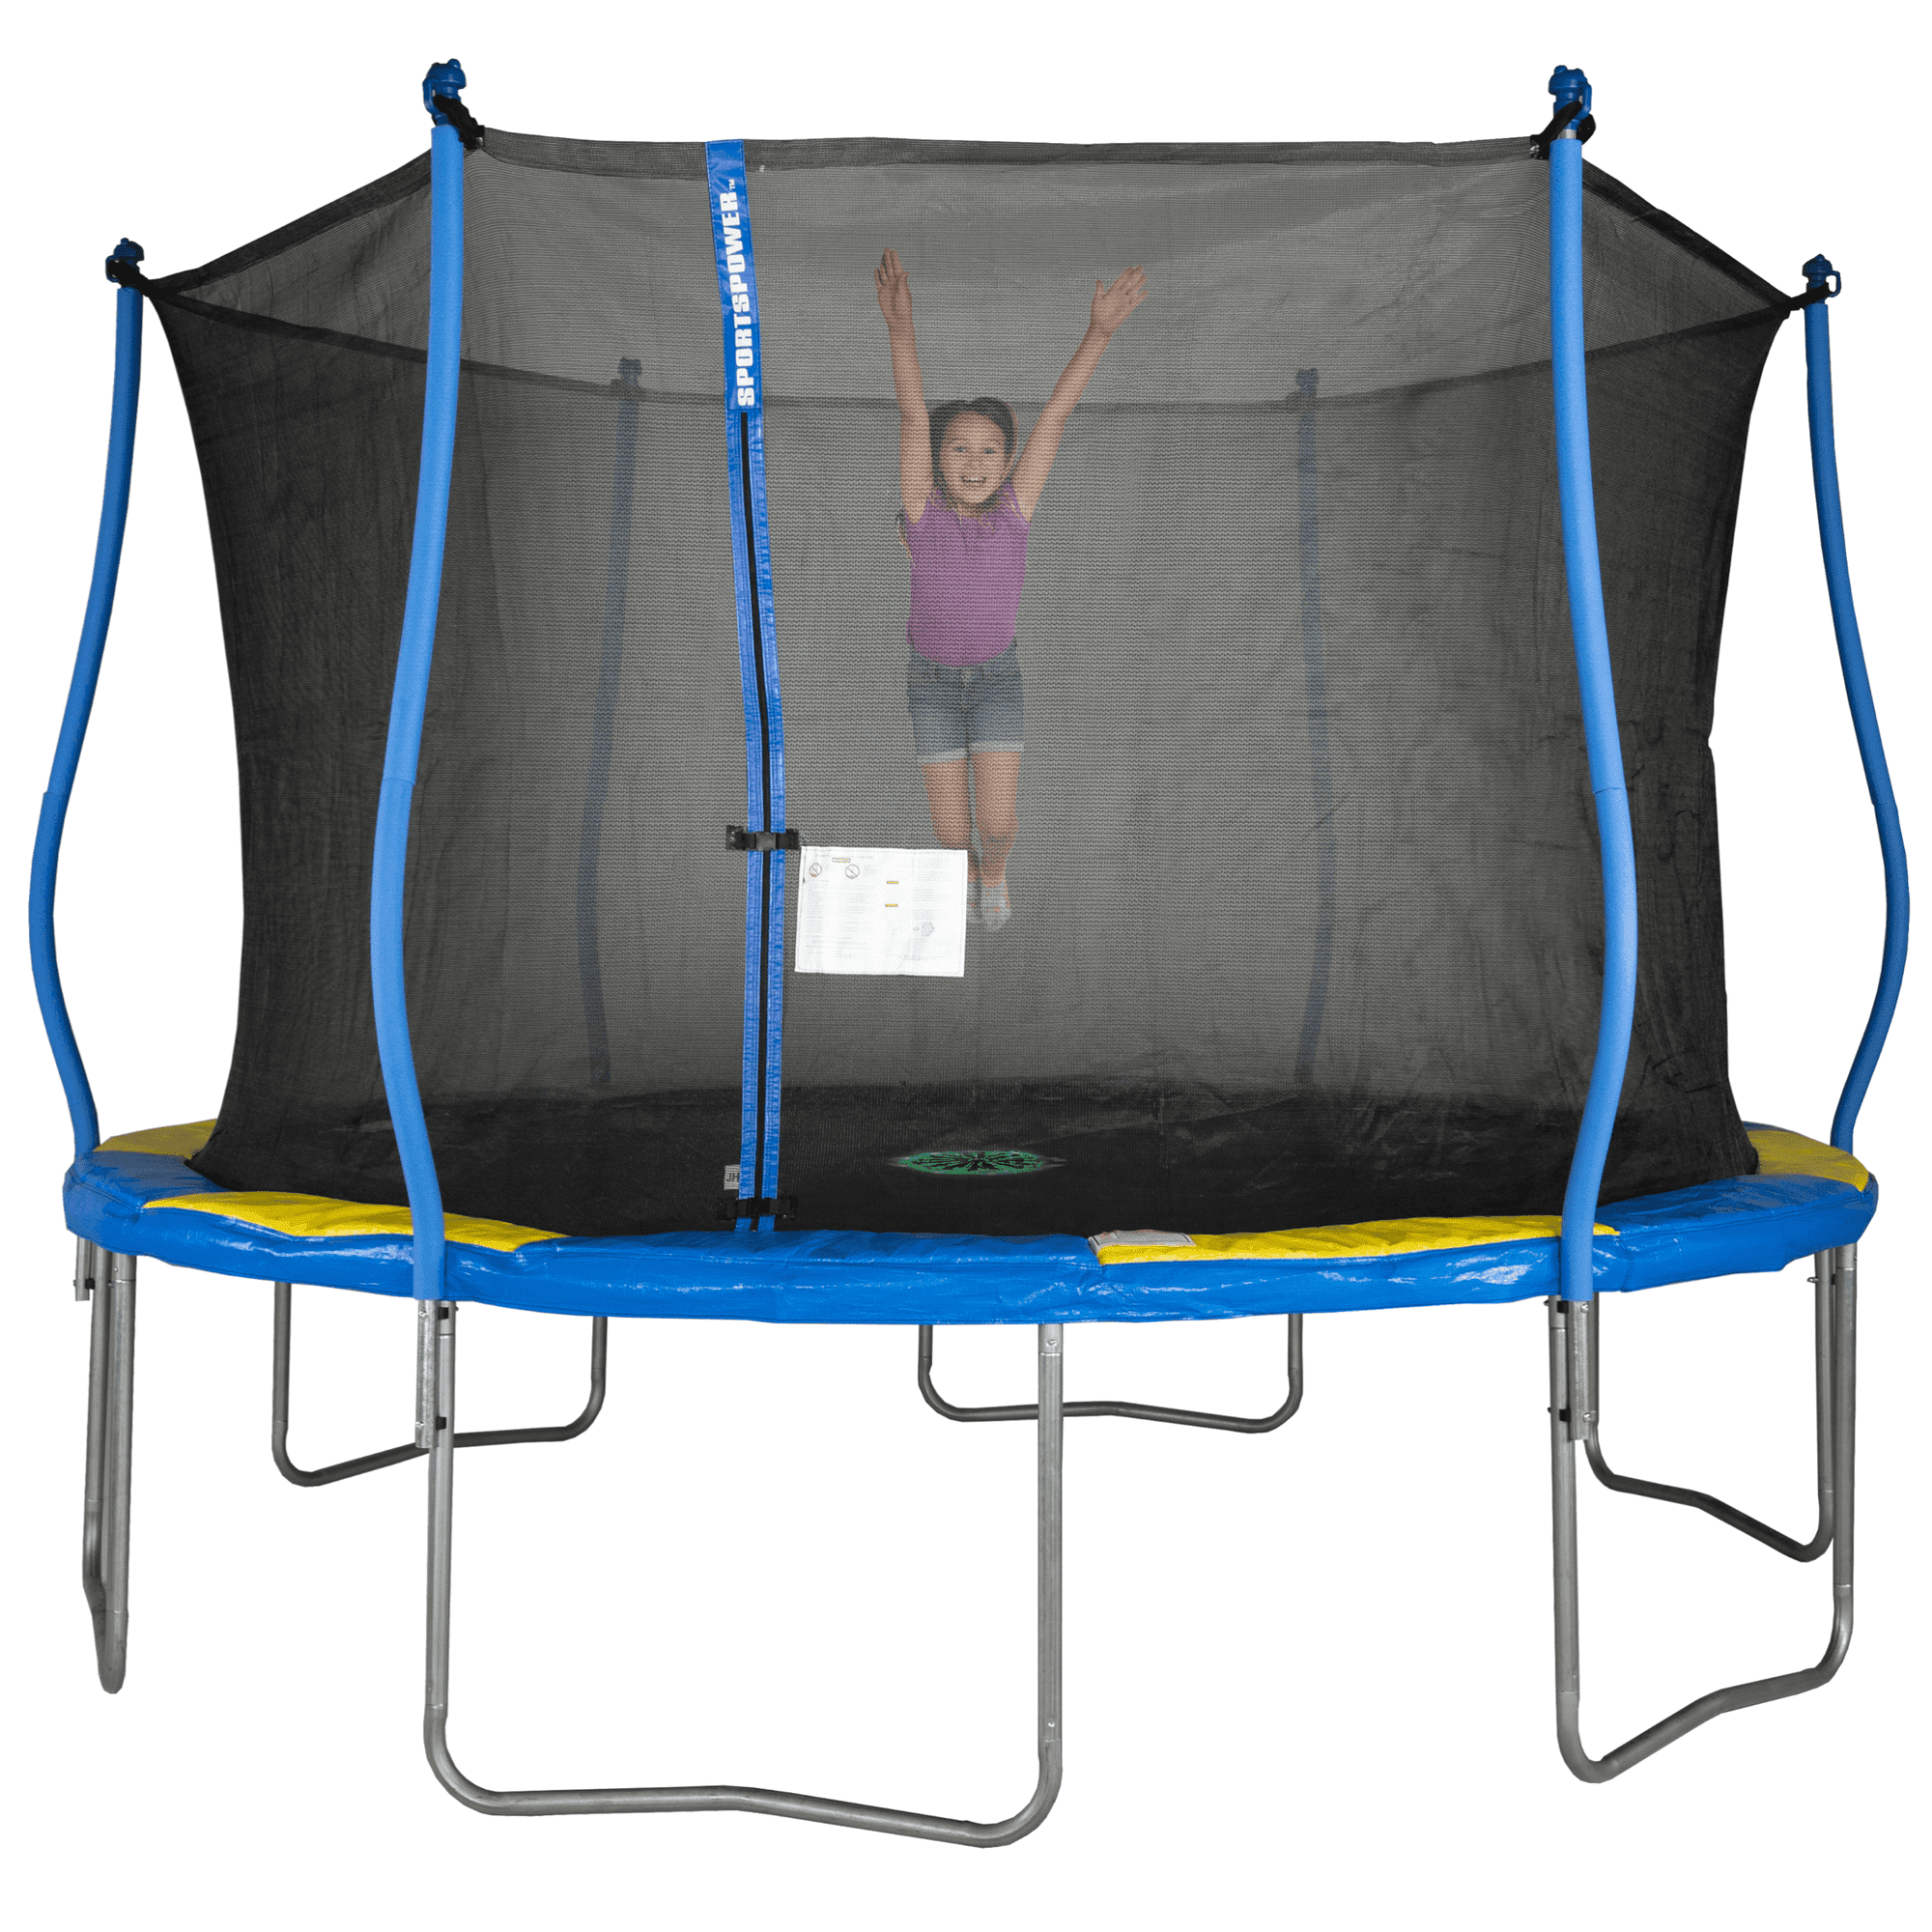 Bounce Pro 12 Foot Trampoline with Flash Light Zone